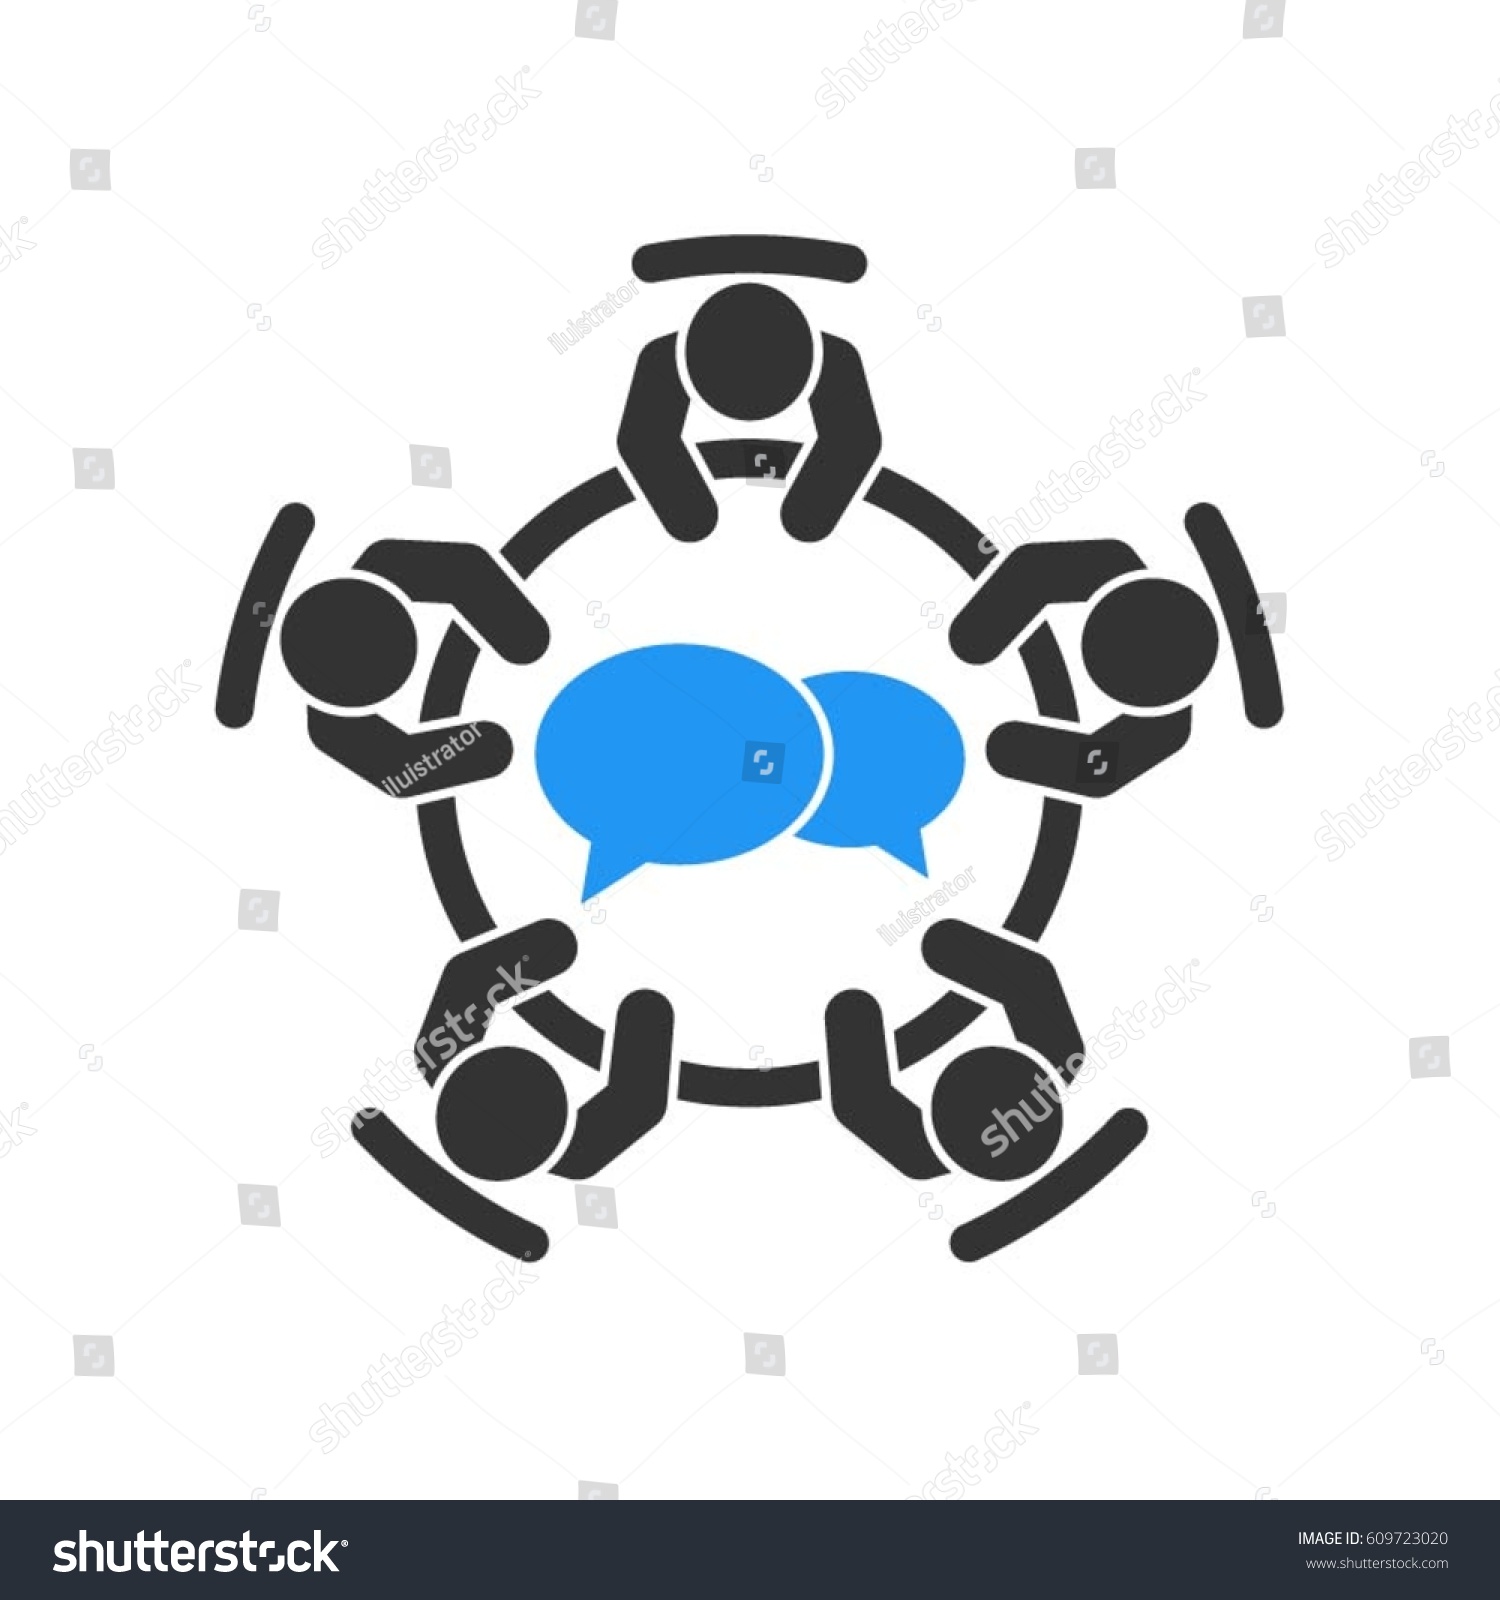 SVG of Brainstorming and teamwork icon. Business meeting. Debate team. Discussion group. People in conference room sitting around a table working together on new creative projects. svg